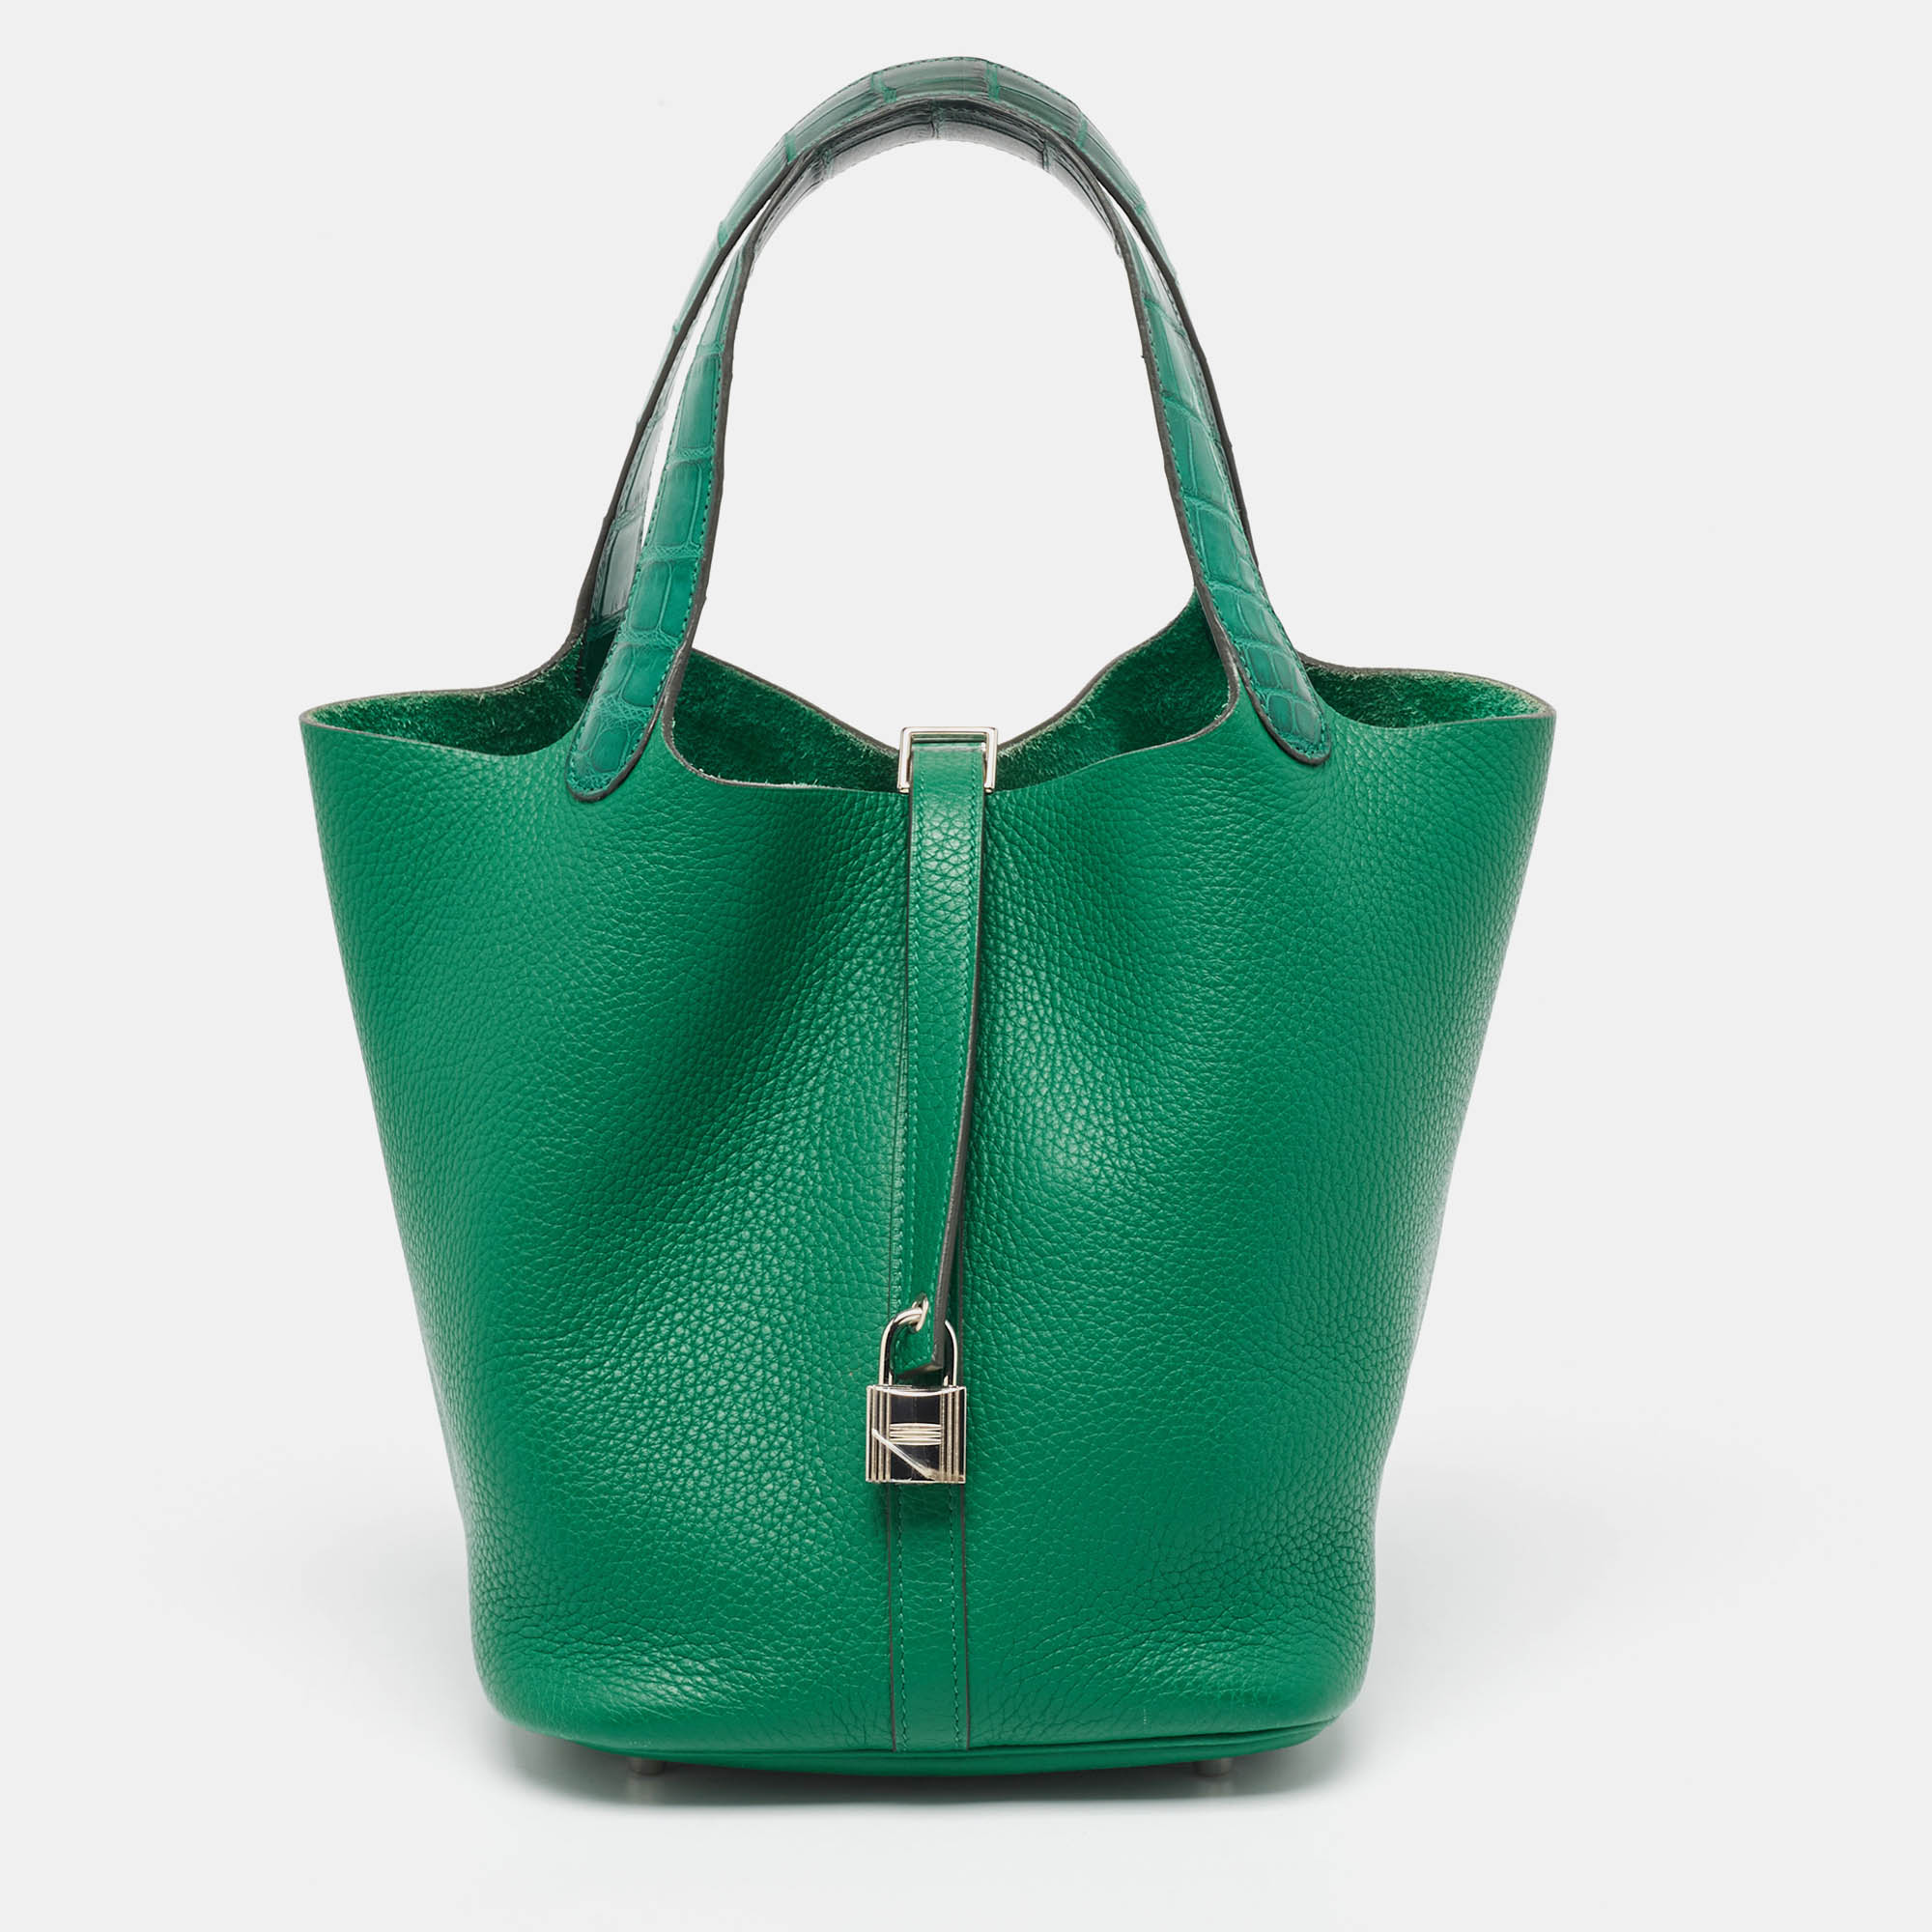 Hermes menthe taurillion leather and alligator picotin lock 22 bag